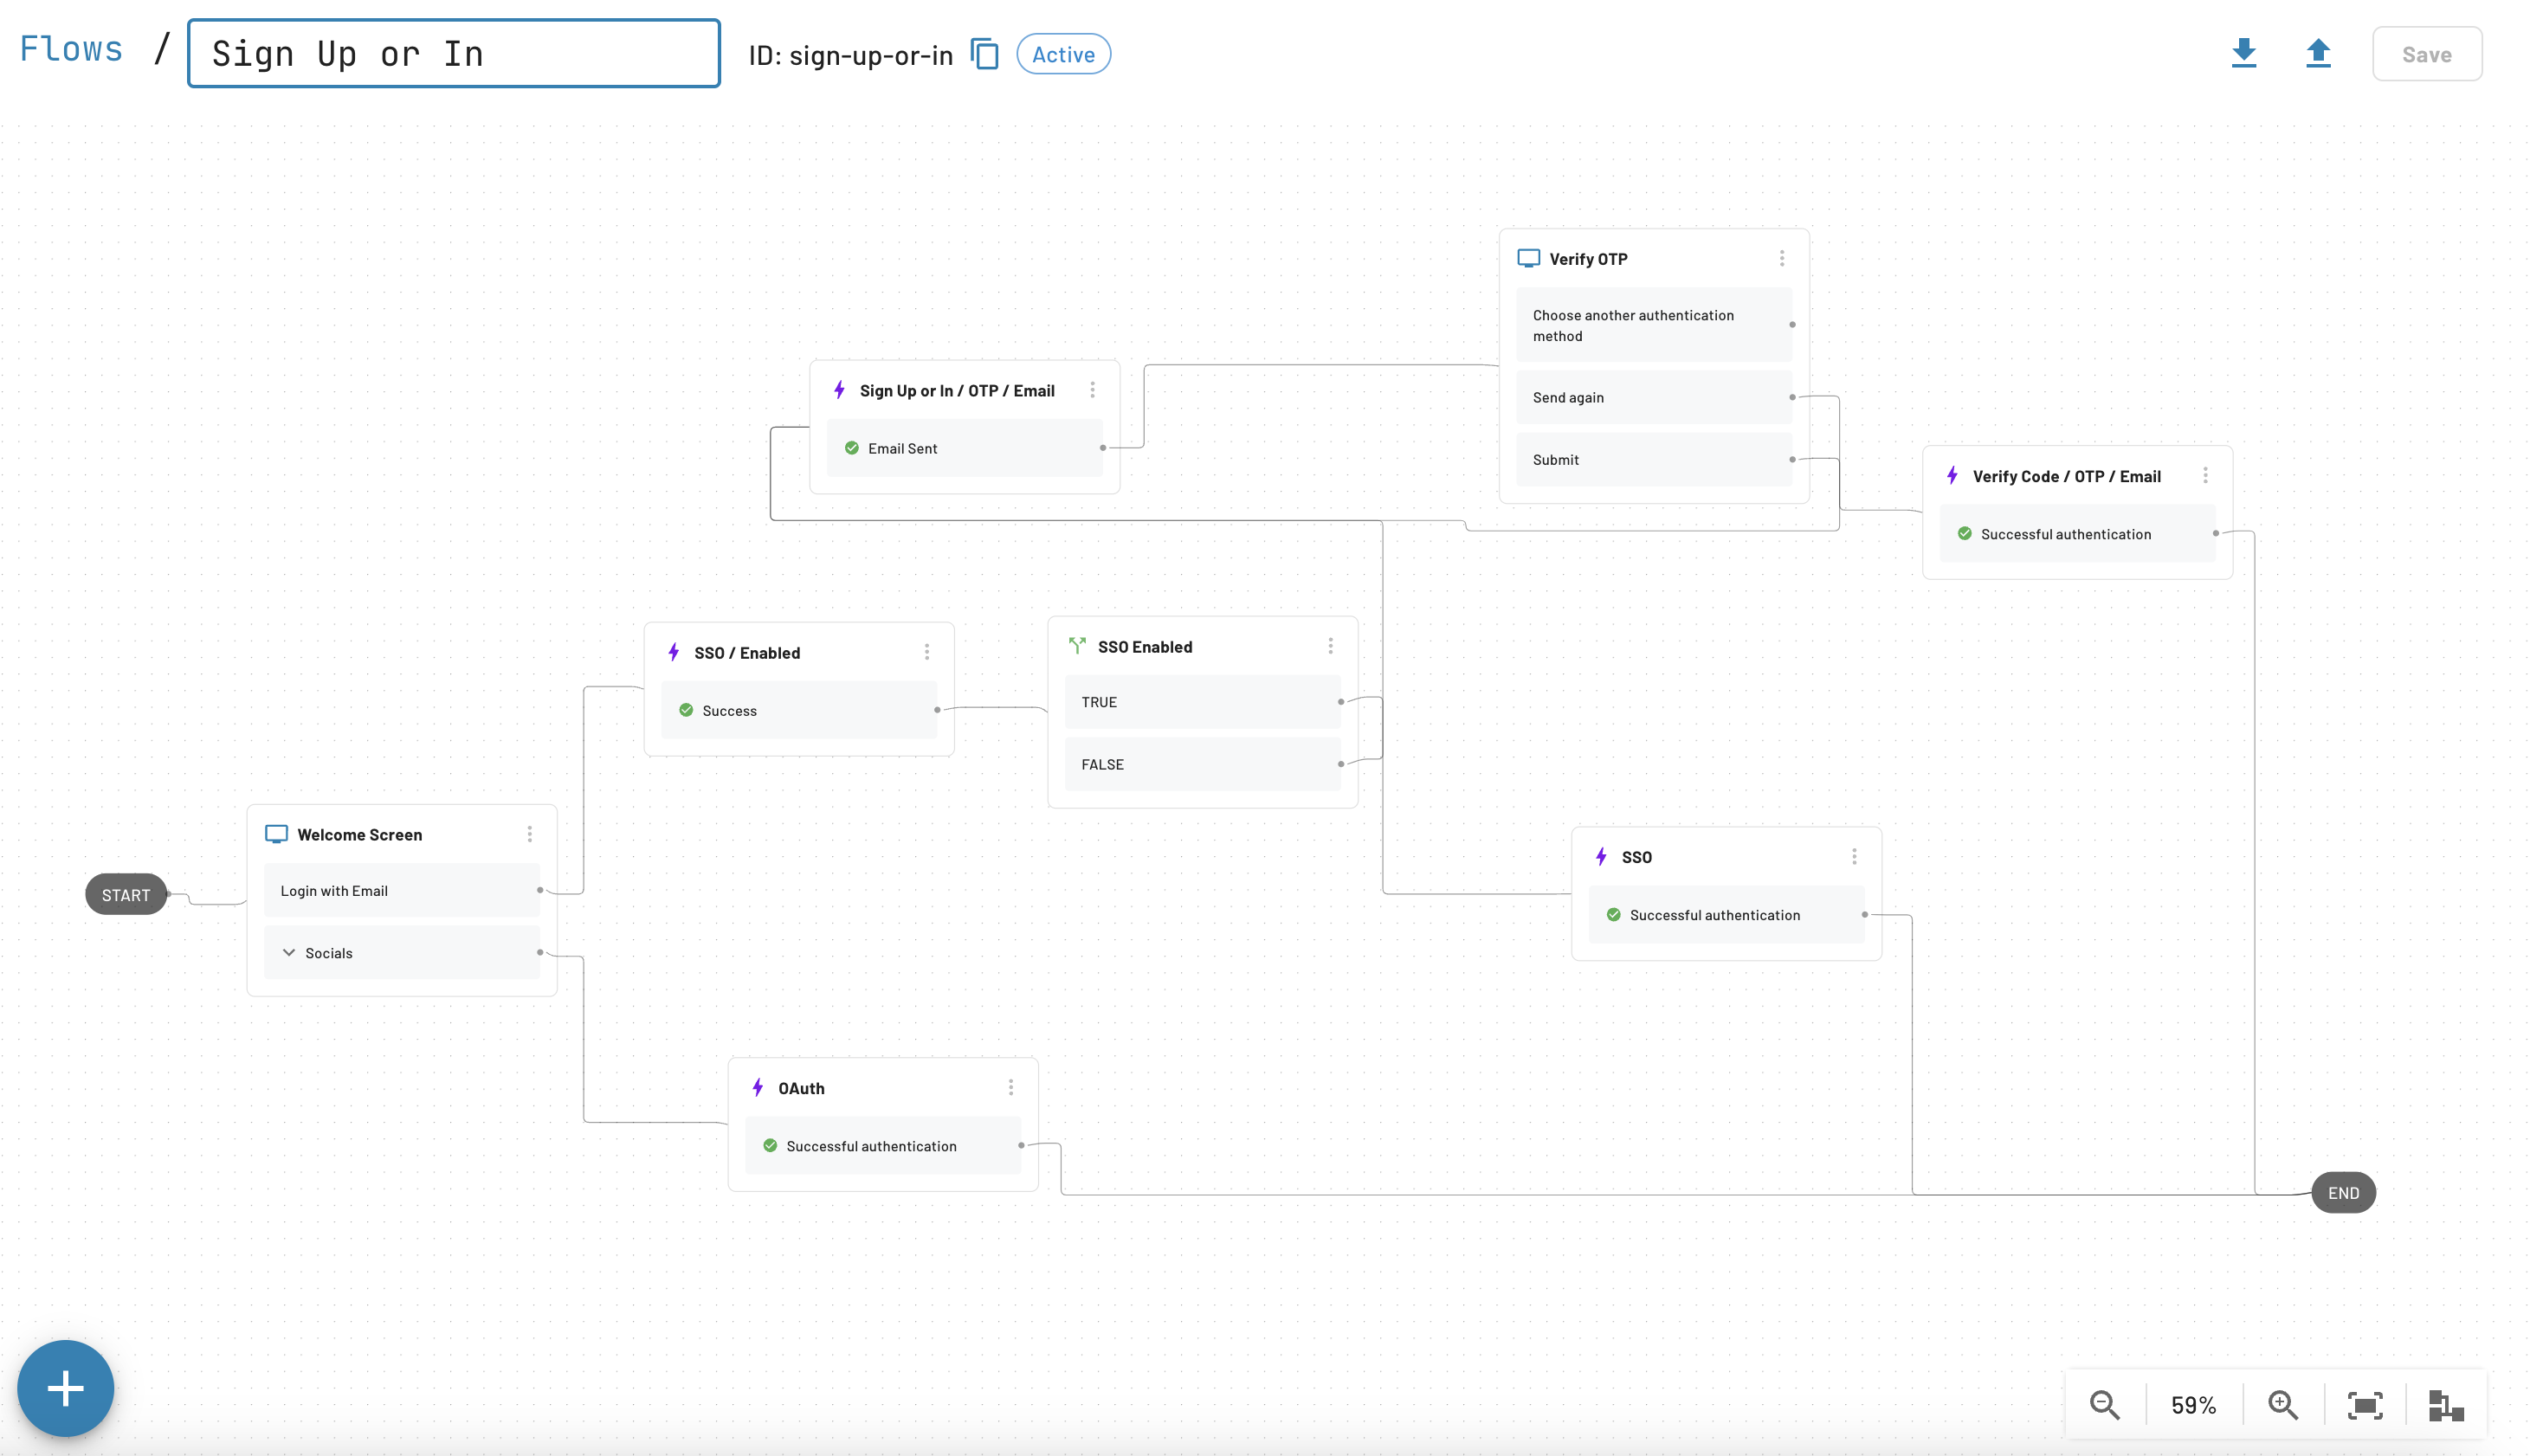 SSOEnabled with Social Login Flow